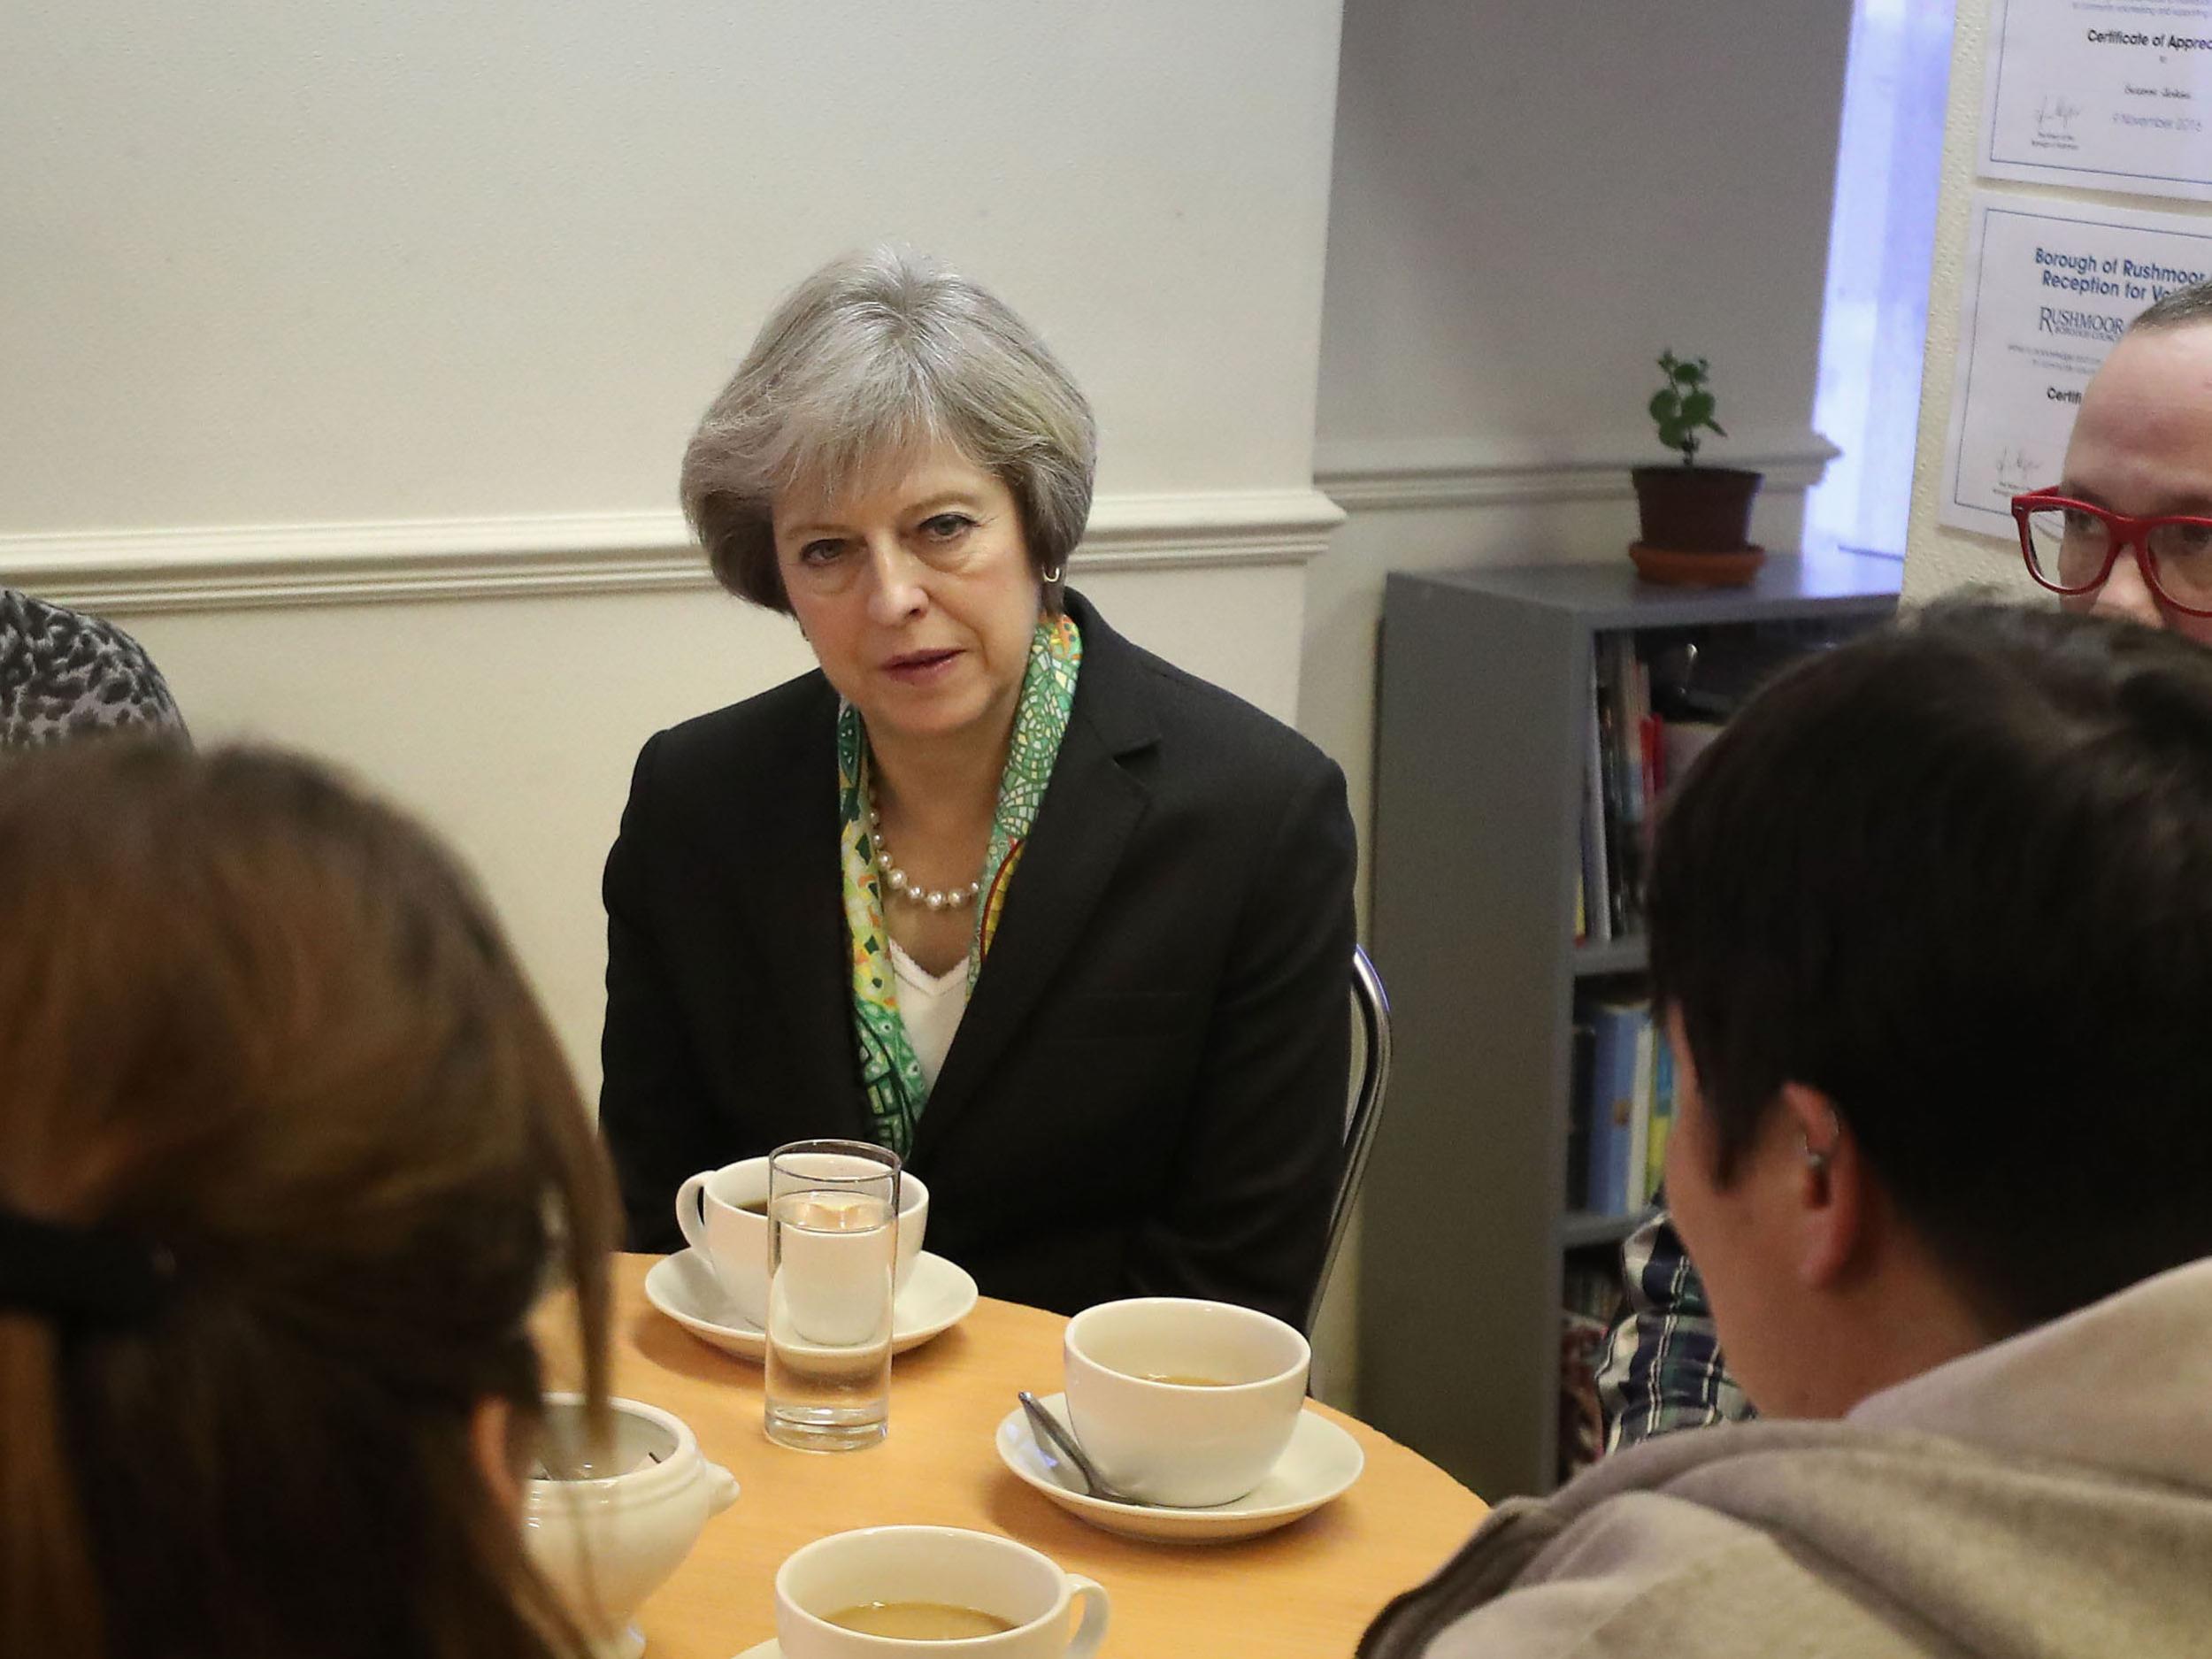 Theresa May visits a community mental health support centre, having promised to 'transform' attitudes to mental health problems